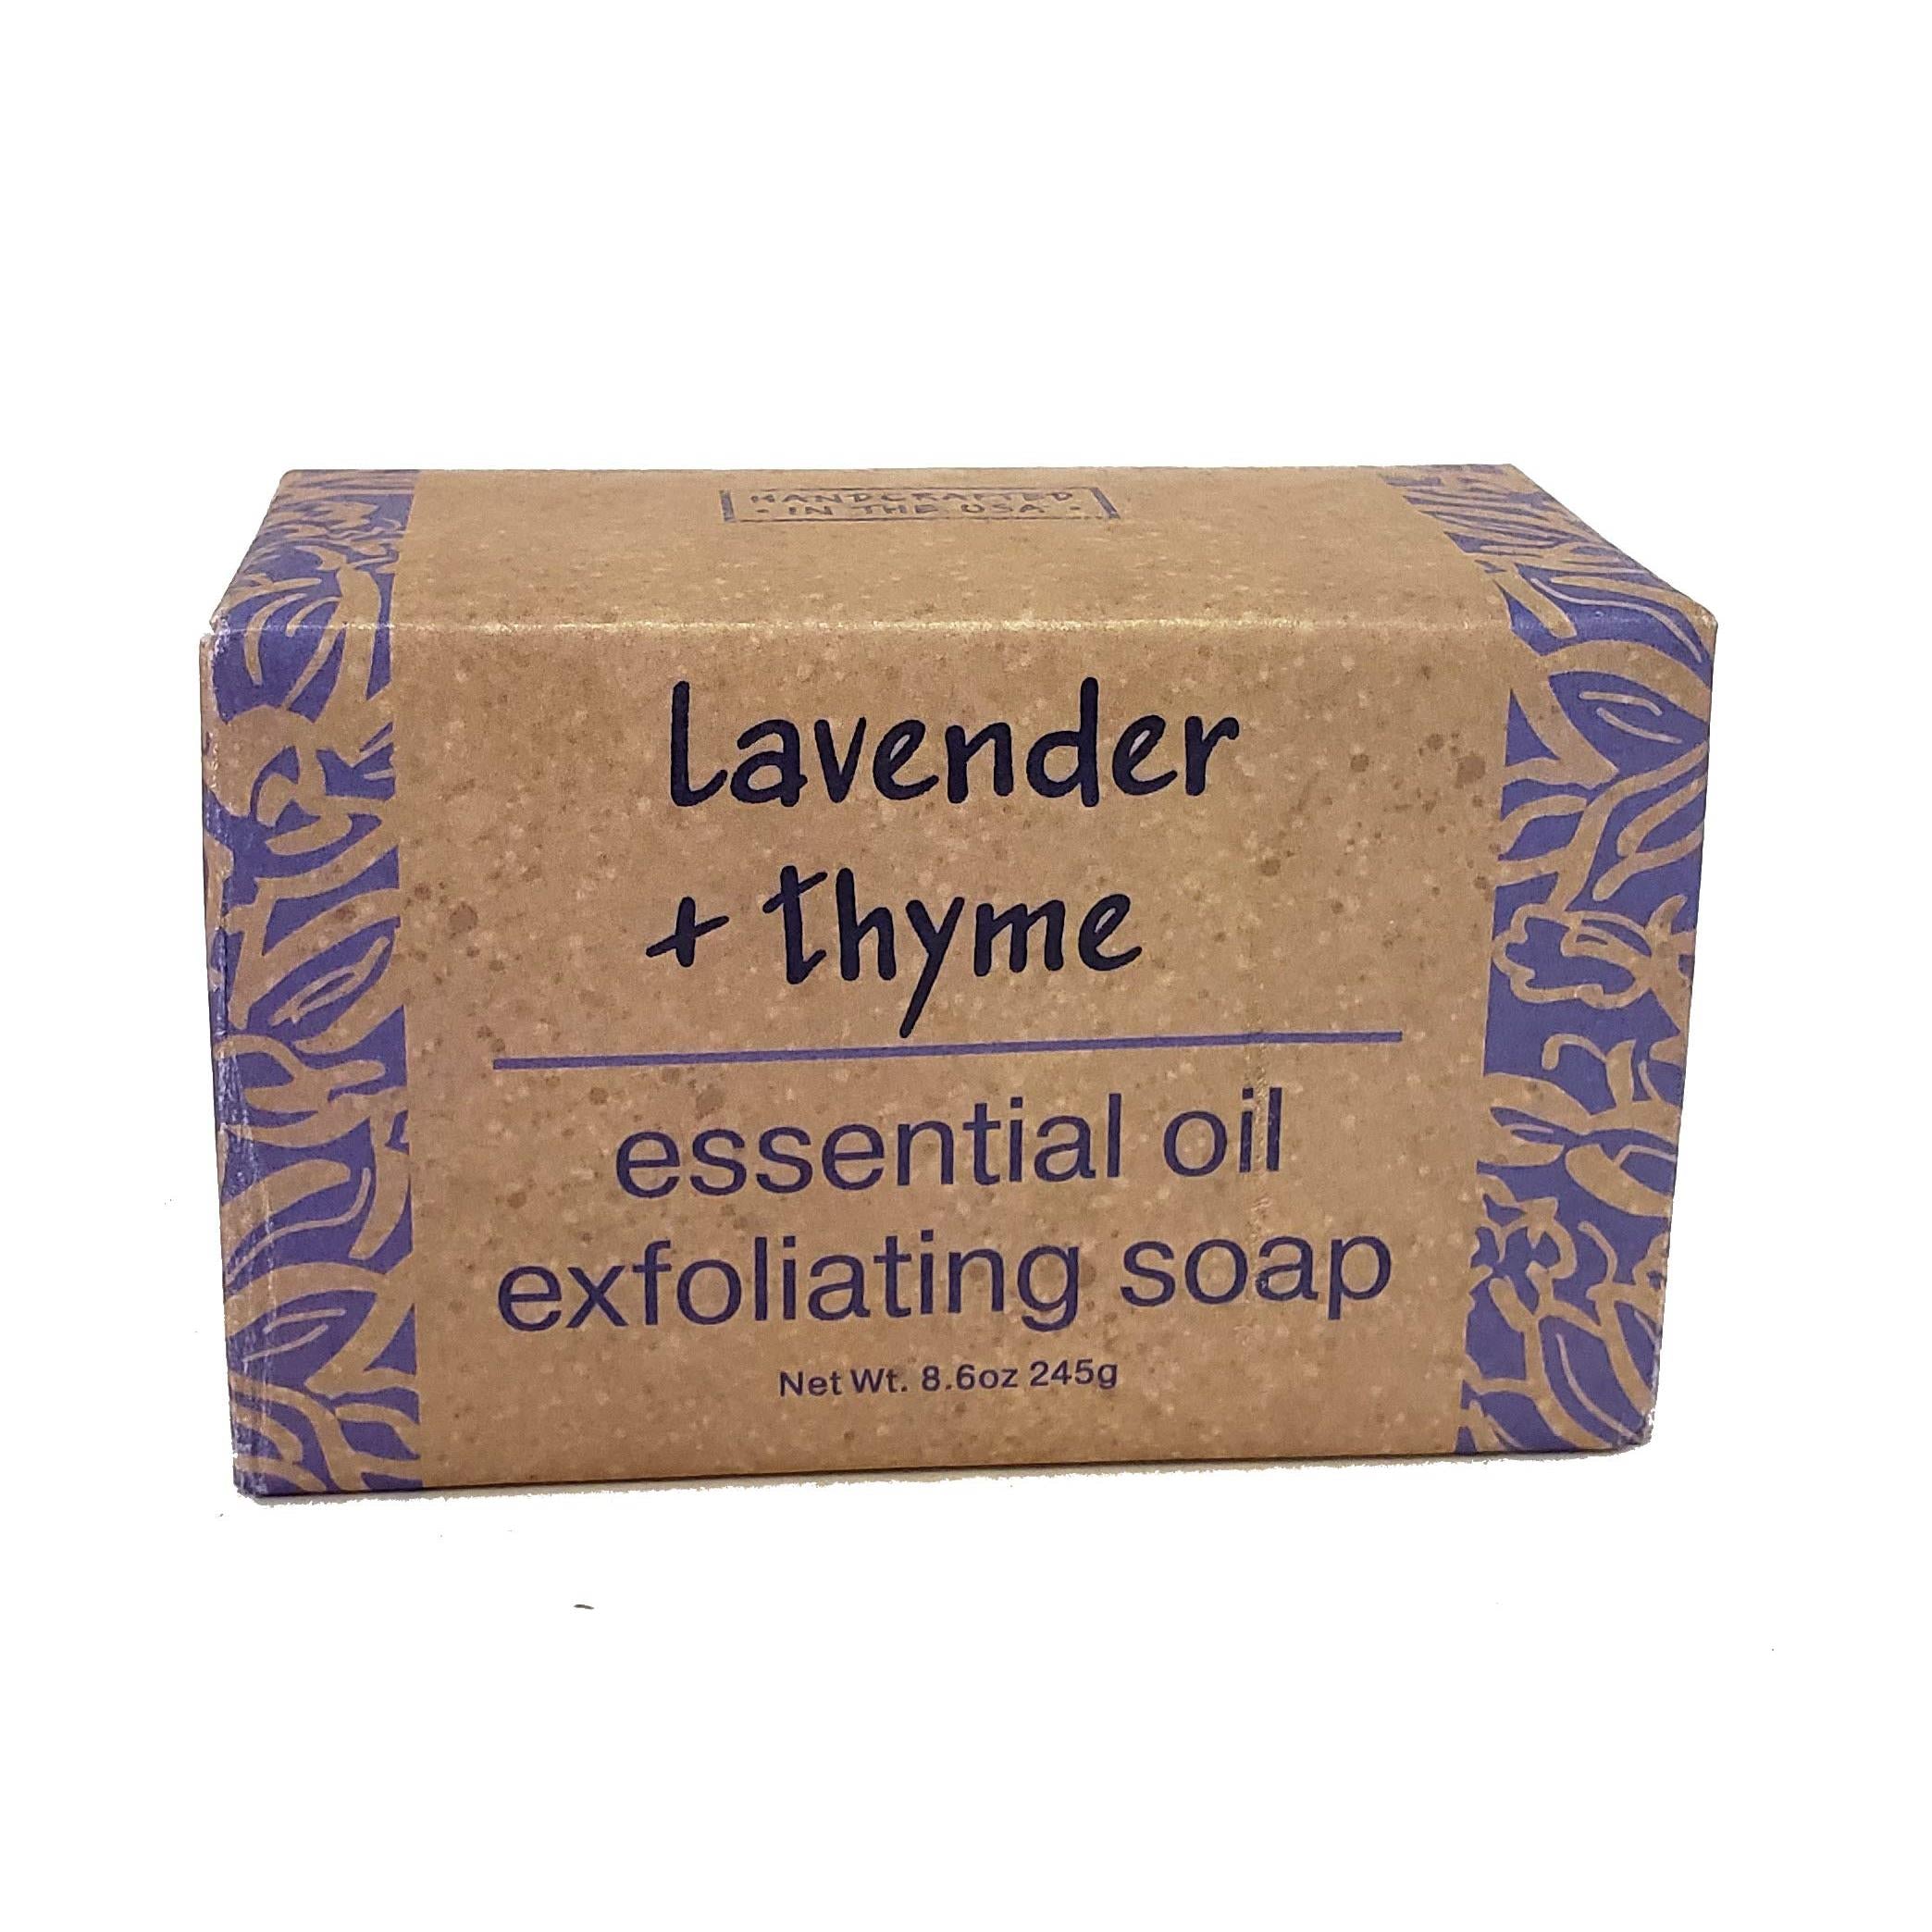 Greenwich Bay Trading Company Essential Oil Collection: Lavender + Thyme (8.6oz)